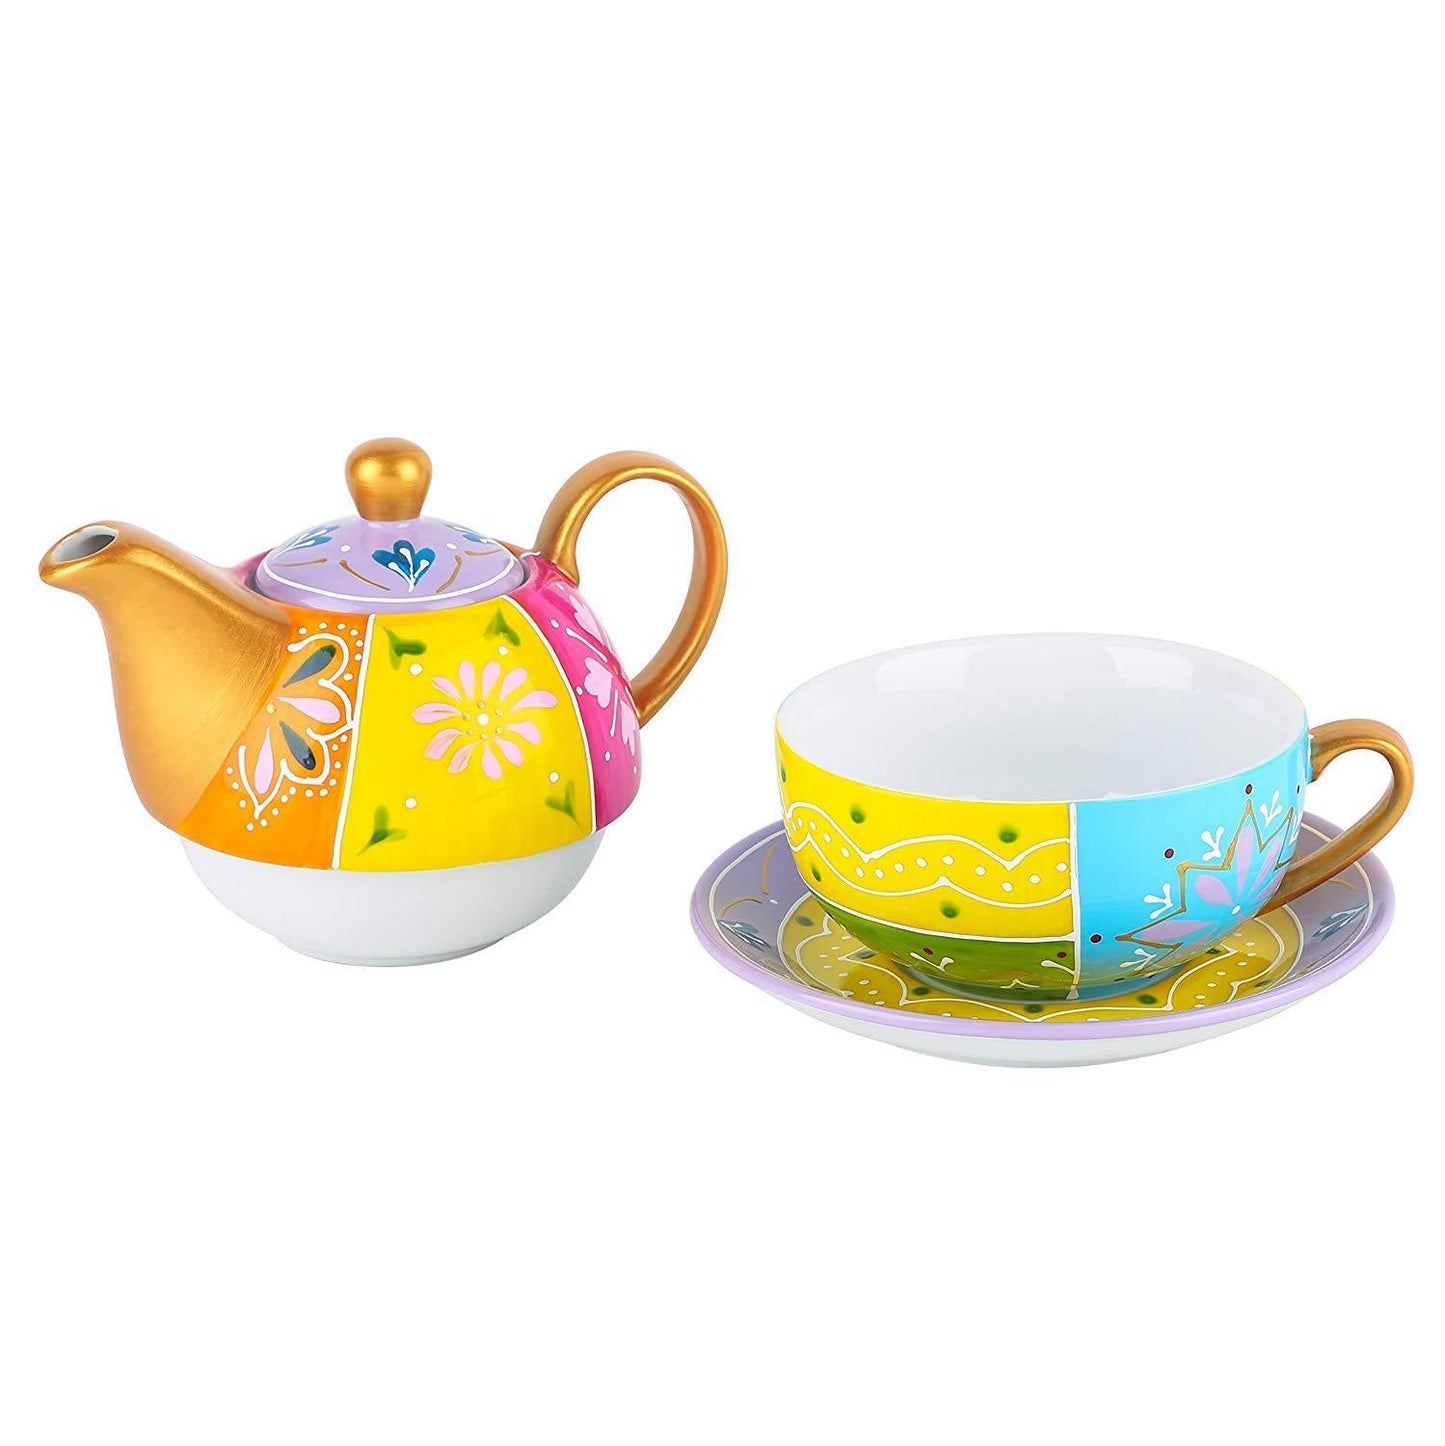 Portable Travel Tea Set for One with One Teapot,Cup and Saucer Stackable Porcelain Family Office Personal Teaware Set - Nordic Side - and, ARTVIGOR, Family, for, Office, One, Personal, Porcel